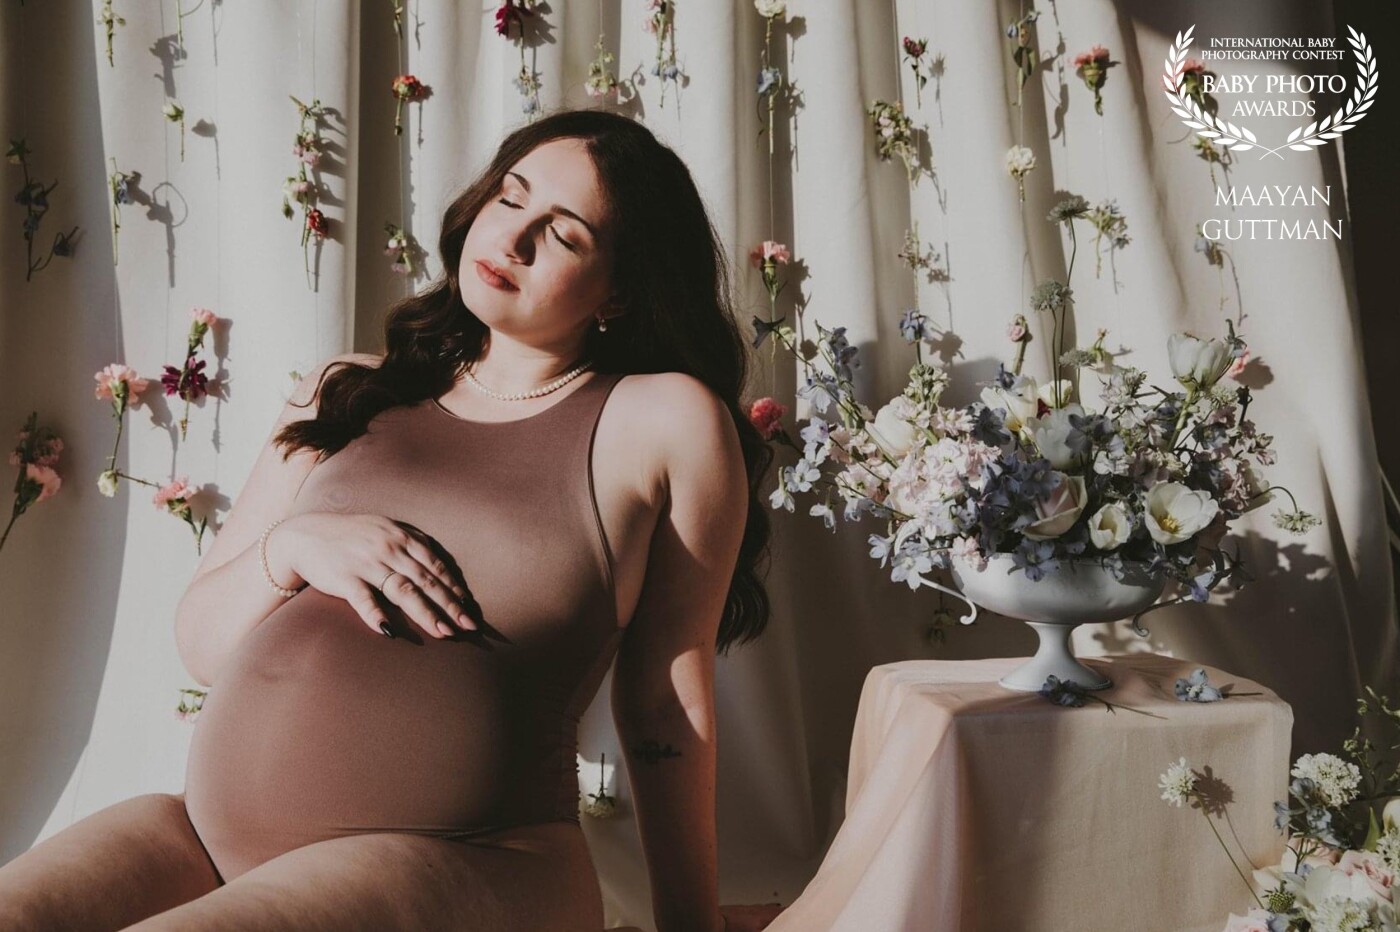 I know Aviv for a long time and I was very excited when she asked me to be her photographer for her pregnancy photoshoot. The whole set was done inside her home and I only used natural lighting. It was a challenge for both of us but we couldn't be happier with the results.